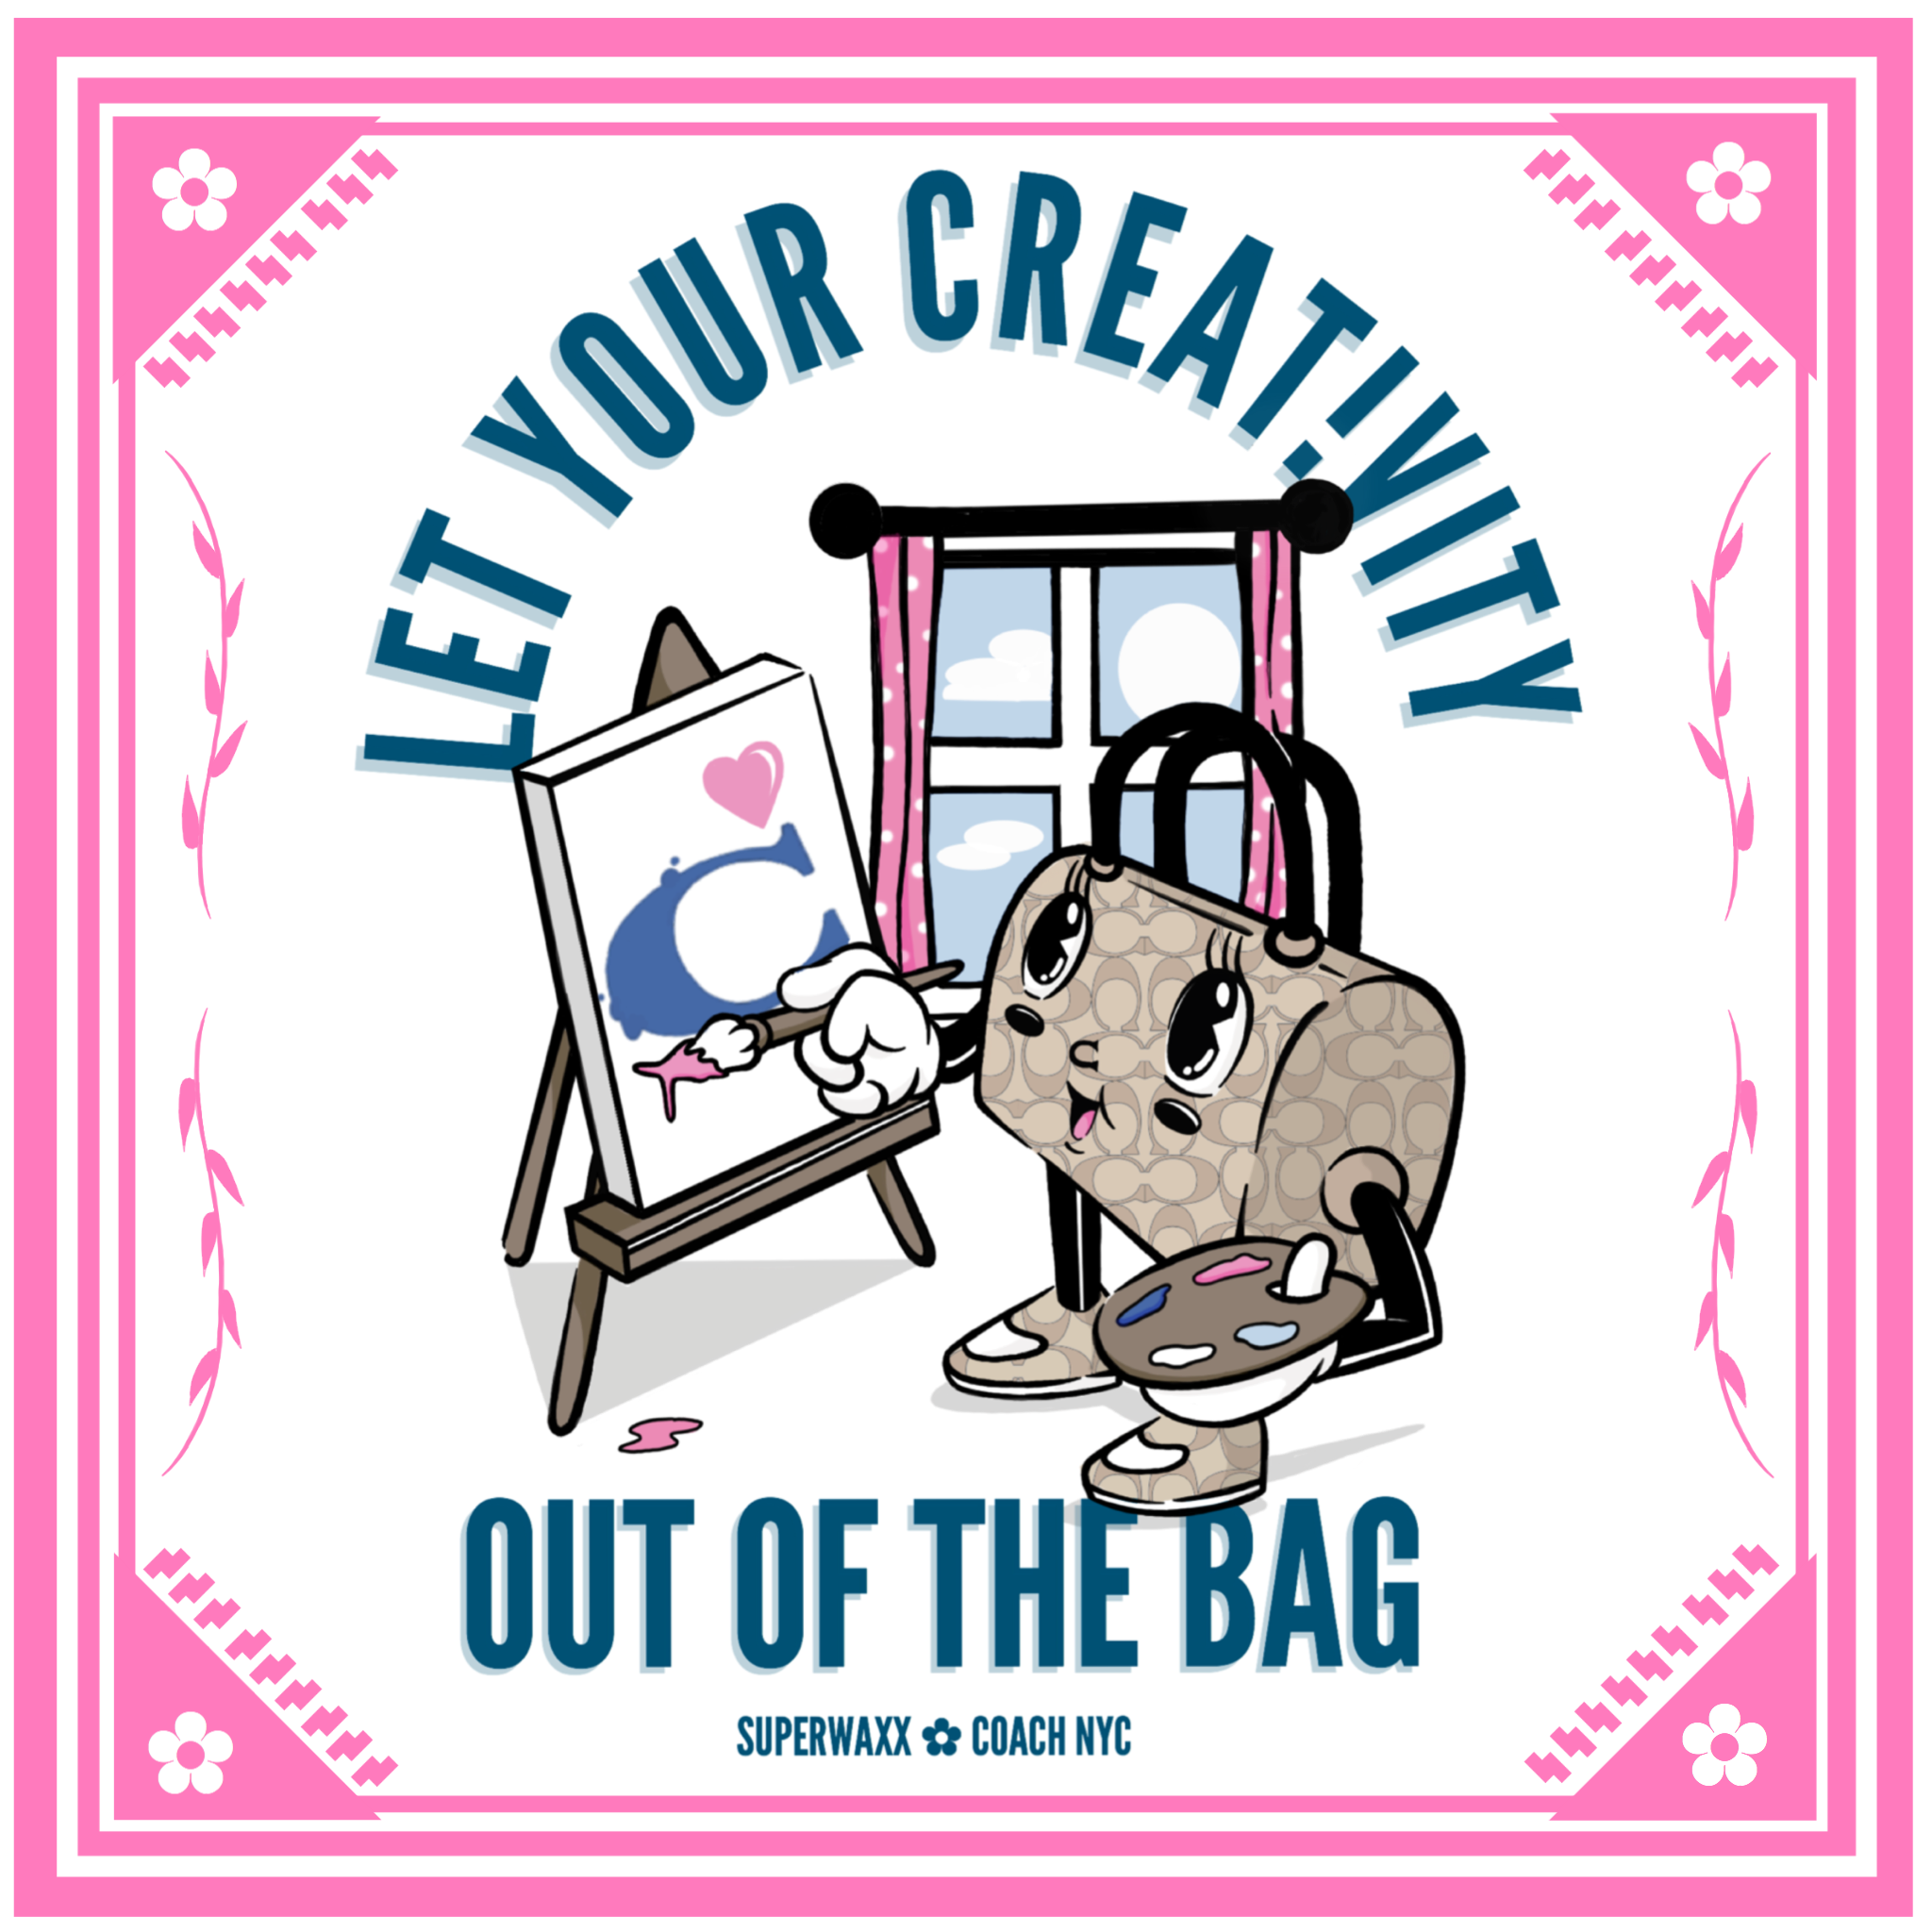 LET YOUR CREATIVITY OUT OF THE BAG